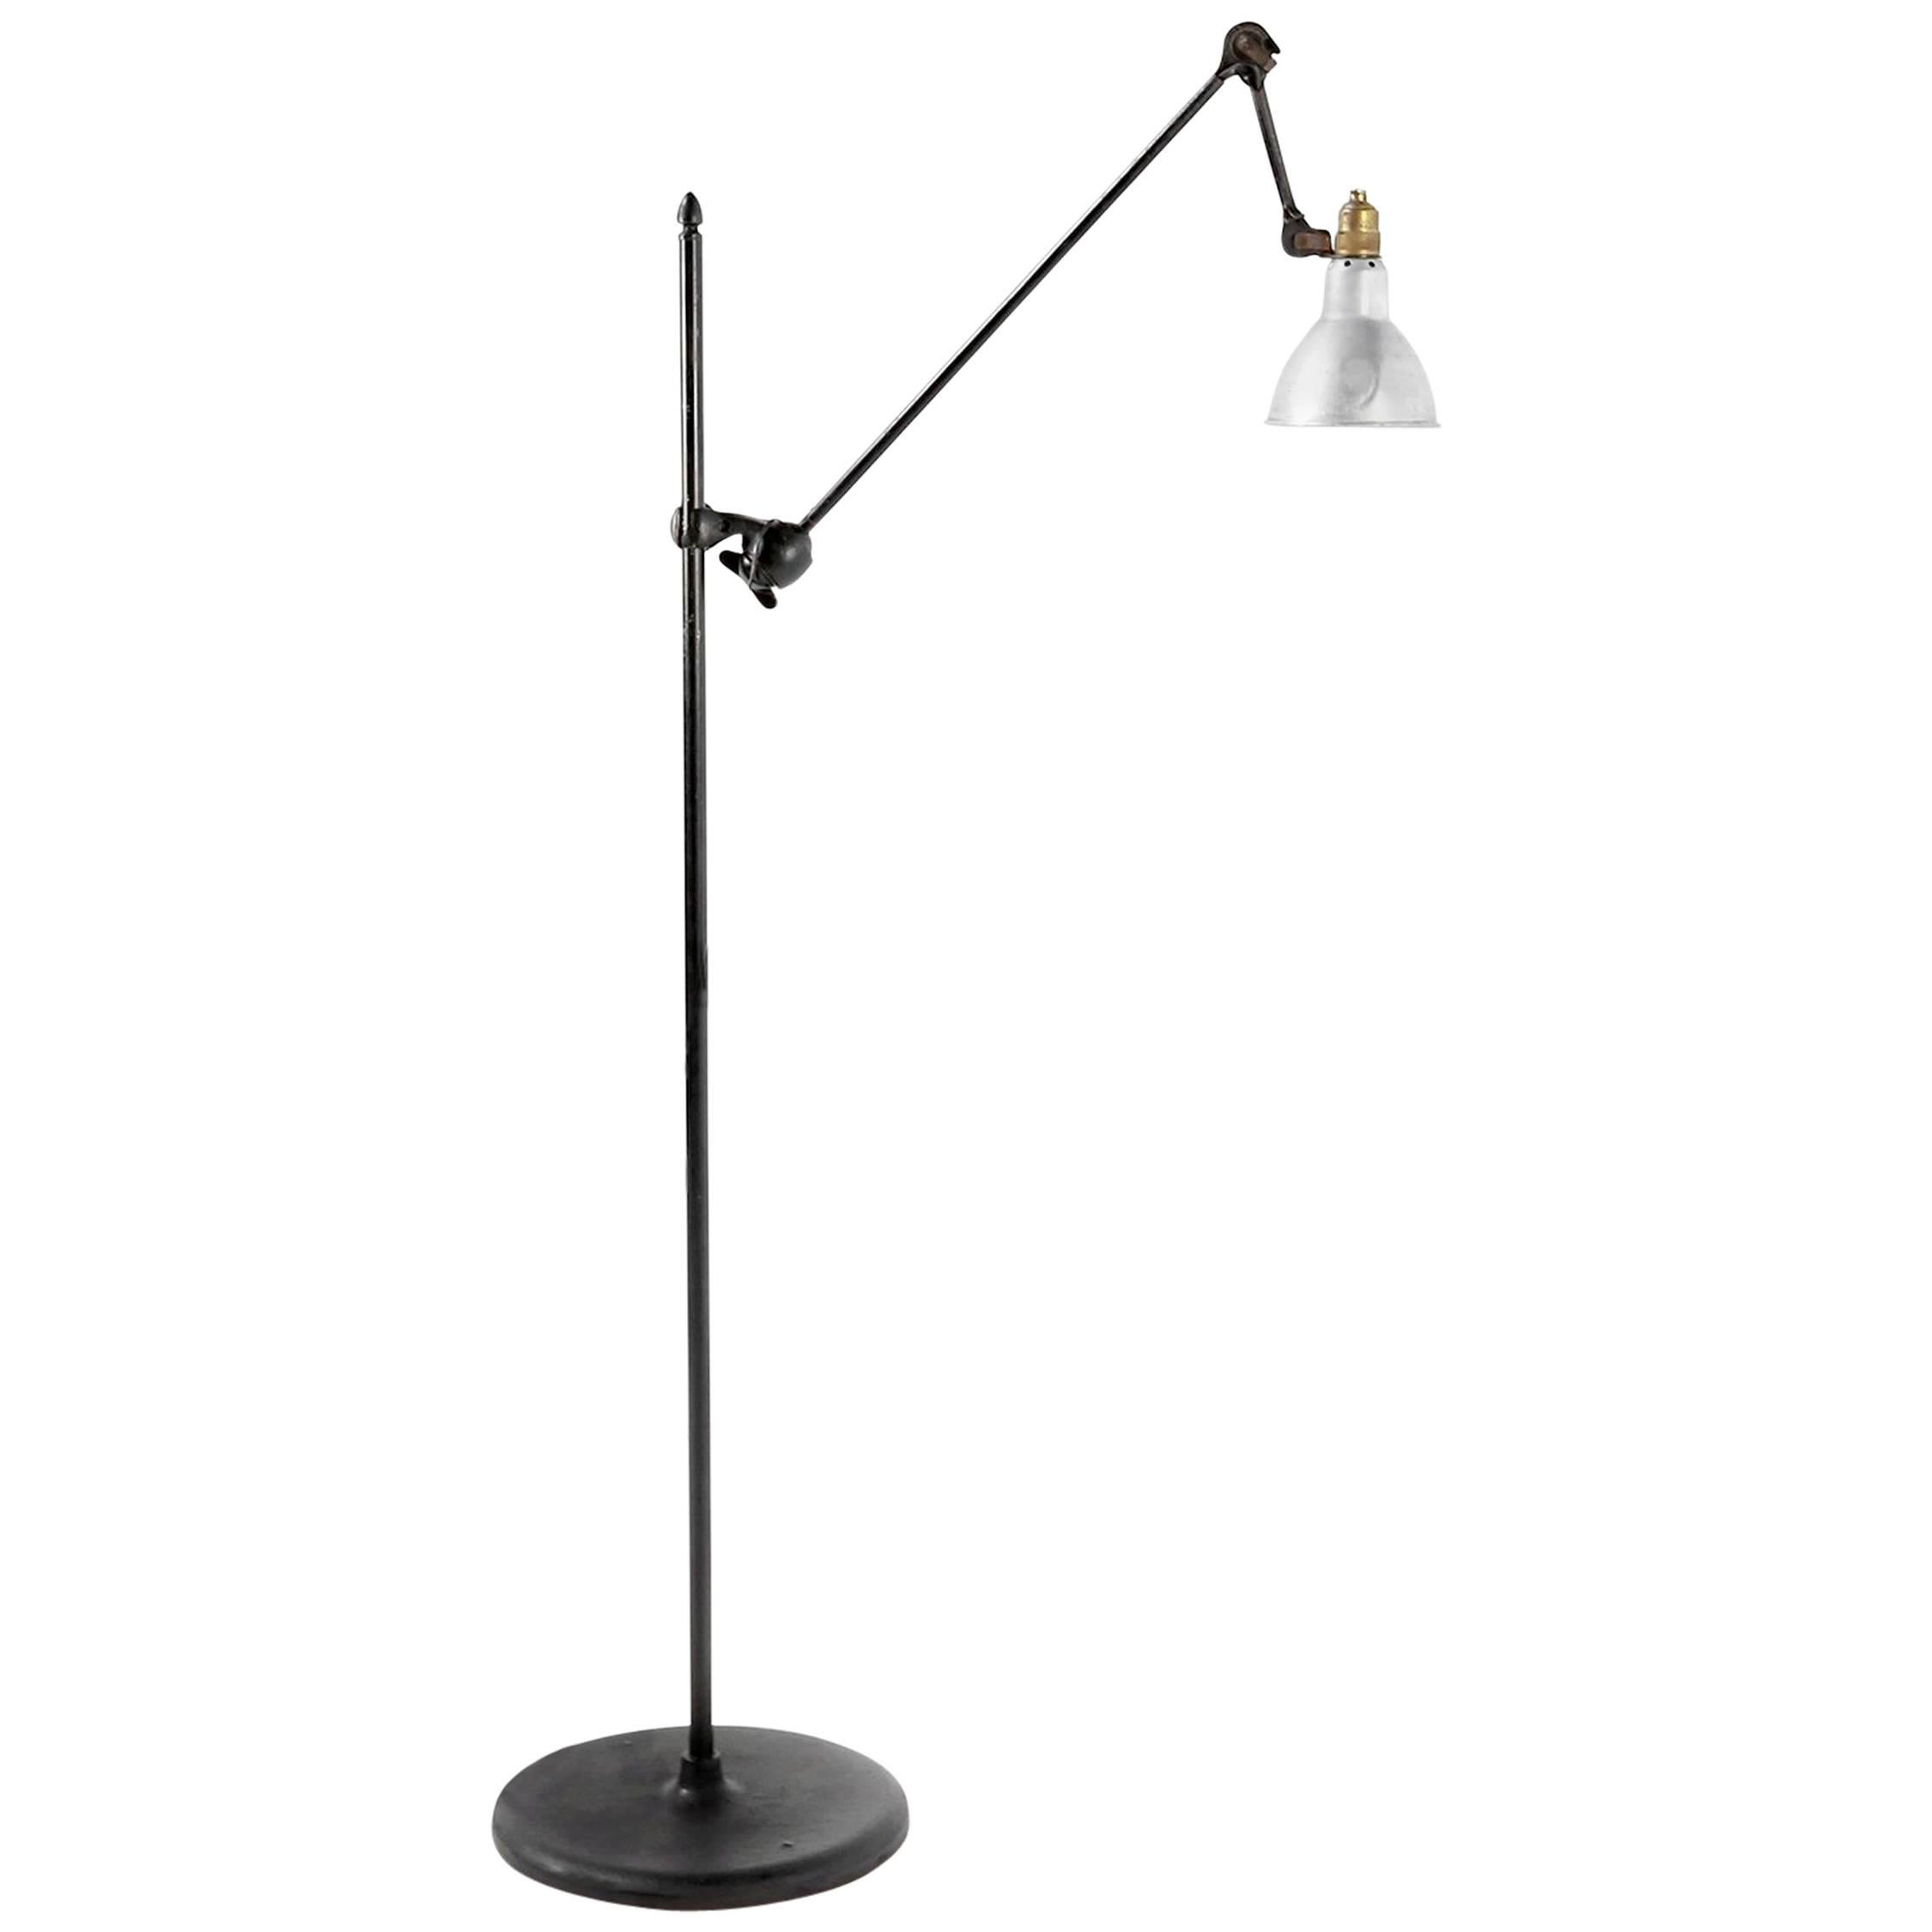 Rare and Early Gras 215 Floor Lamp First Edition